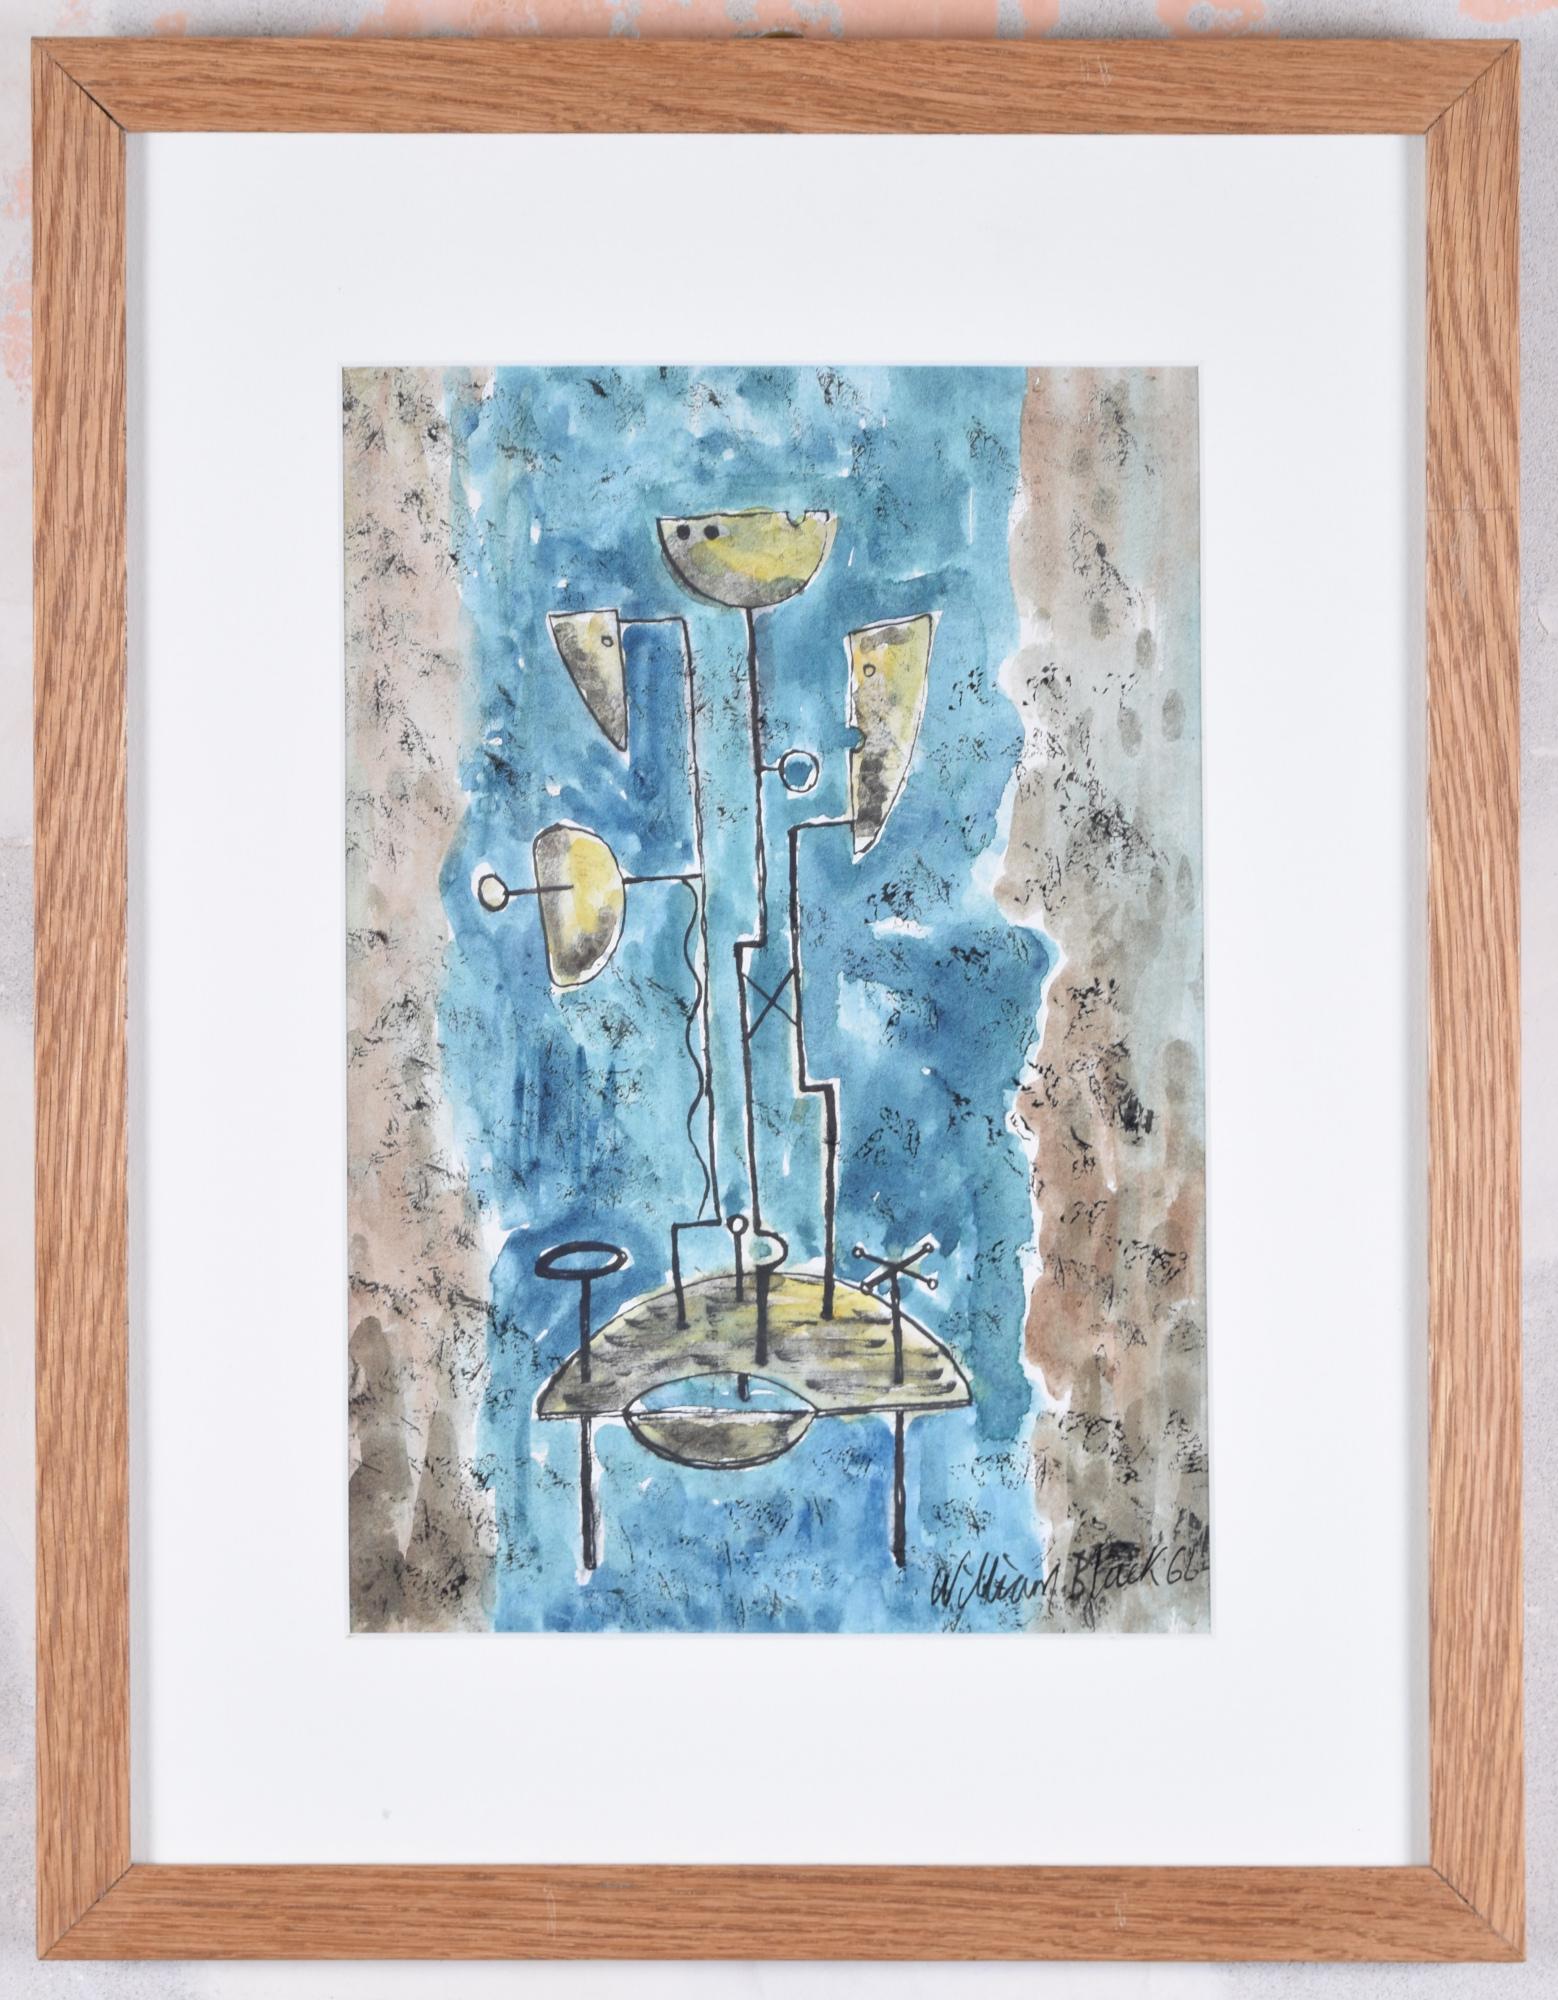 To see our other Modern British Art, scroll down to "More from this Seller" and below it click on "See all from this Seller" - or send us a message if you cannot find the artist you want.

William Black
Design for Sculpture (1966)
Watercolour
18 x